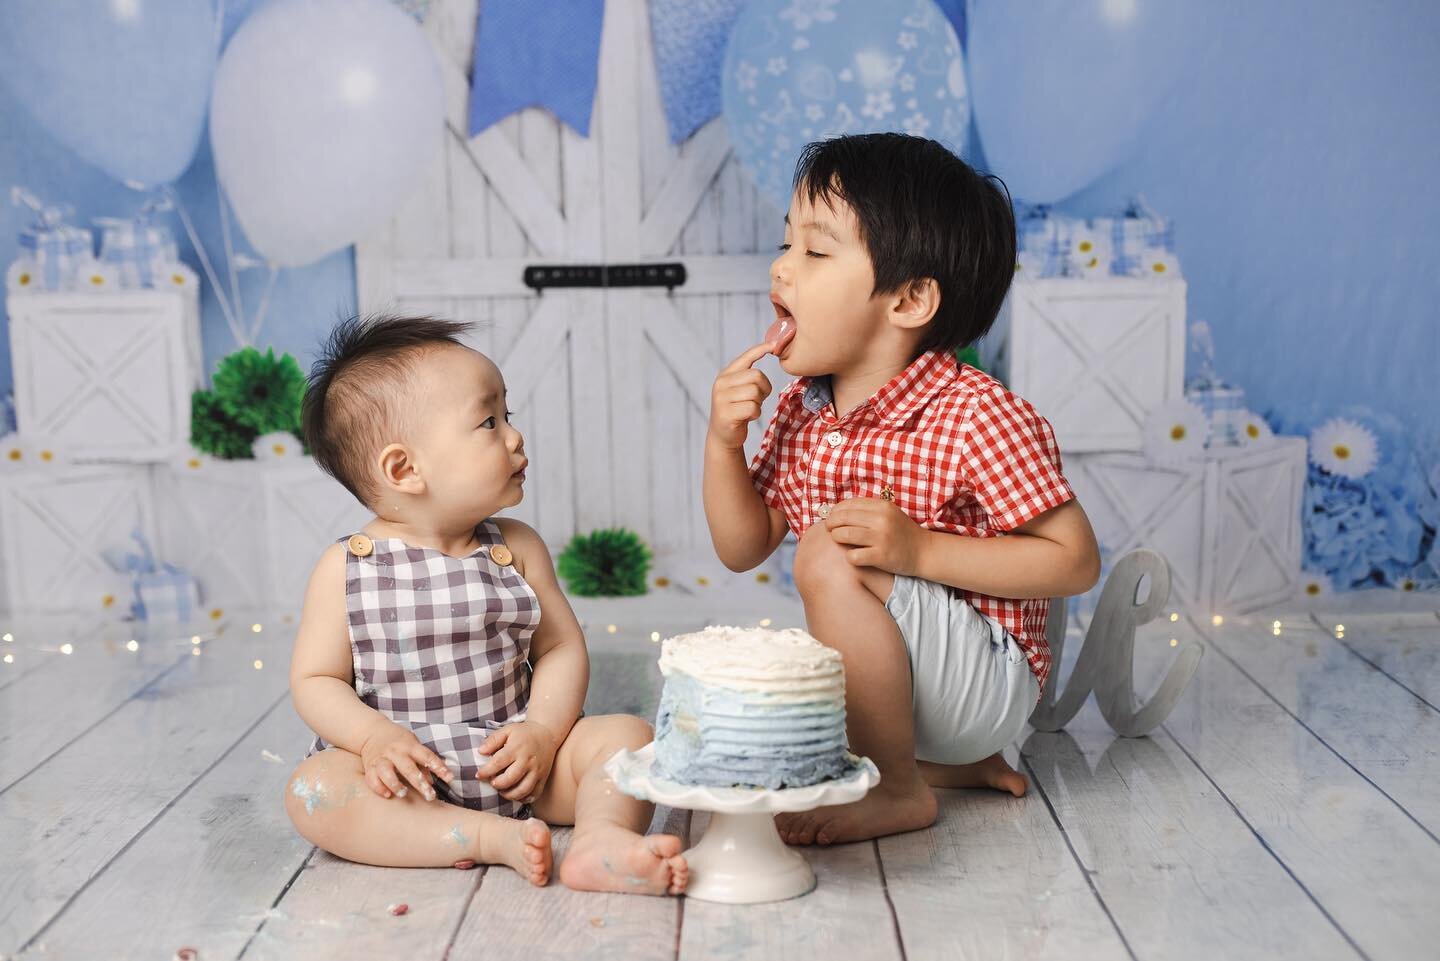 These brothers are so cute! Big brother enjoyed the cake too 💙 
.
.
.
.
.
.
#calgaryphotographer #calgarycakesmash #calgaryfamilyphotographer #calgarymoms #cakesmash #brothers #cuteness #lovemyjob #oneyearold